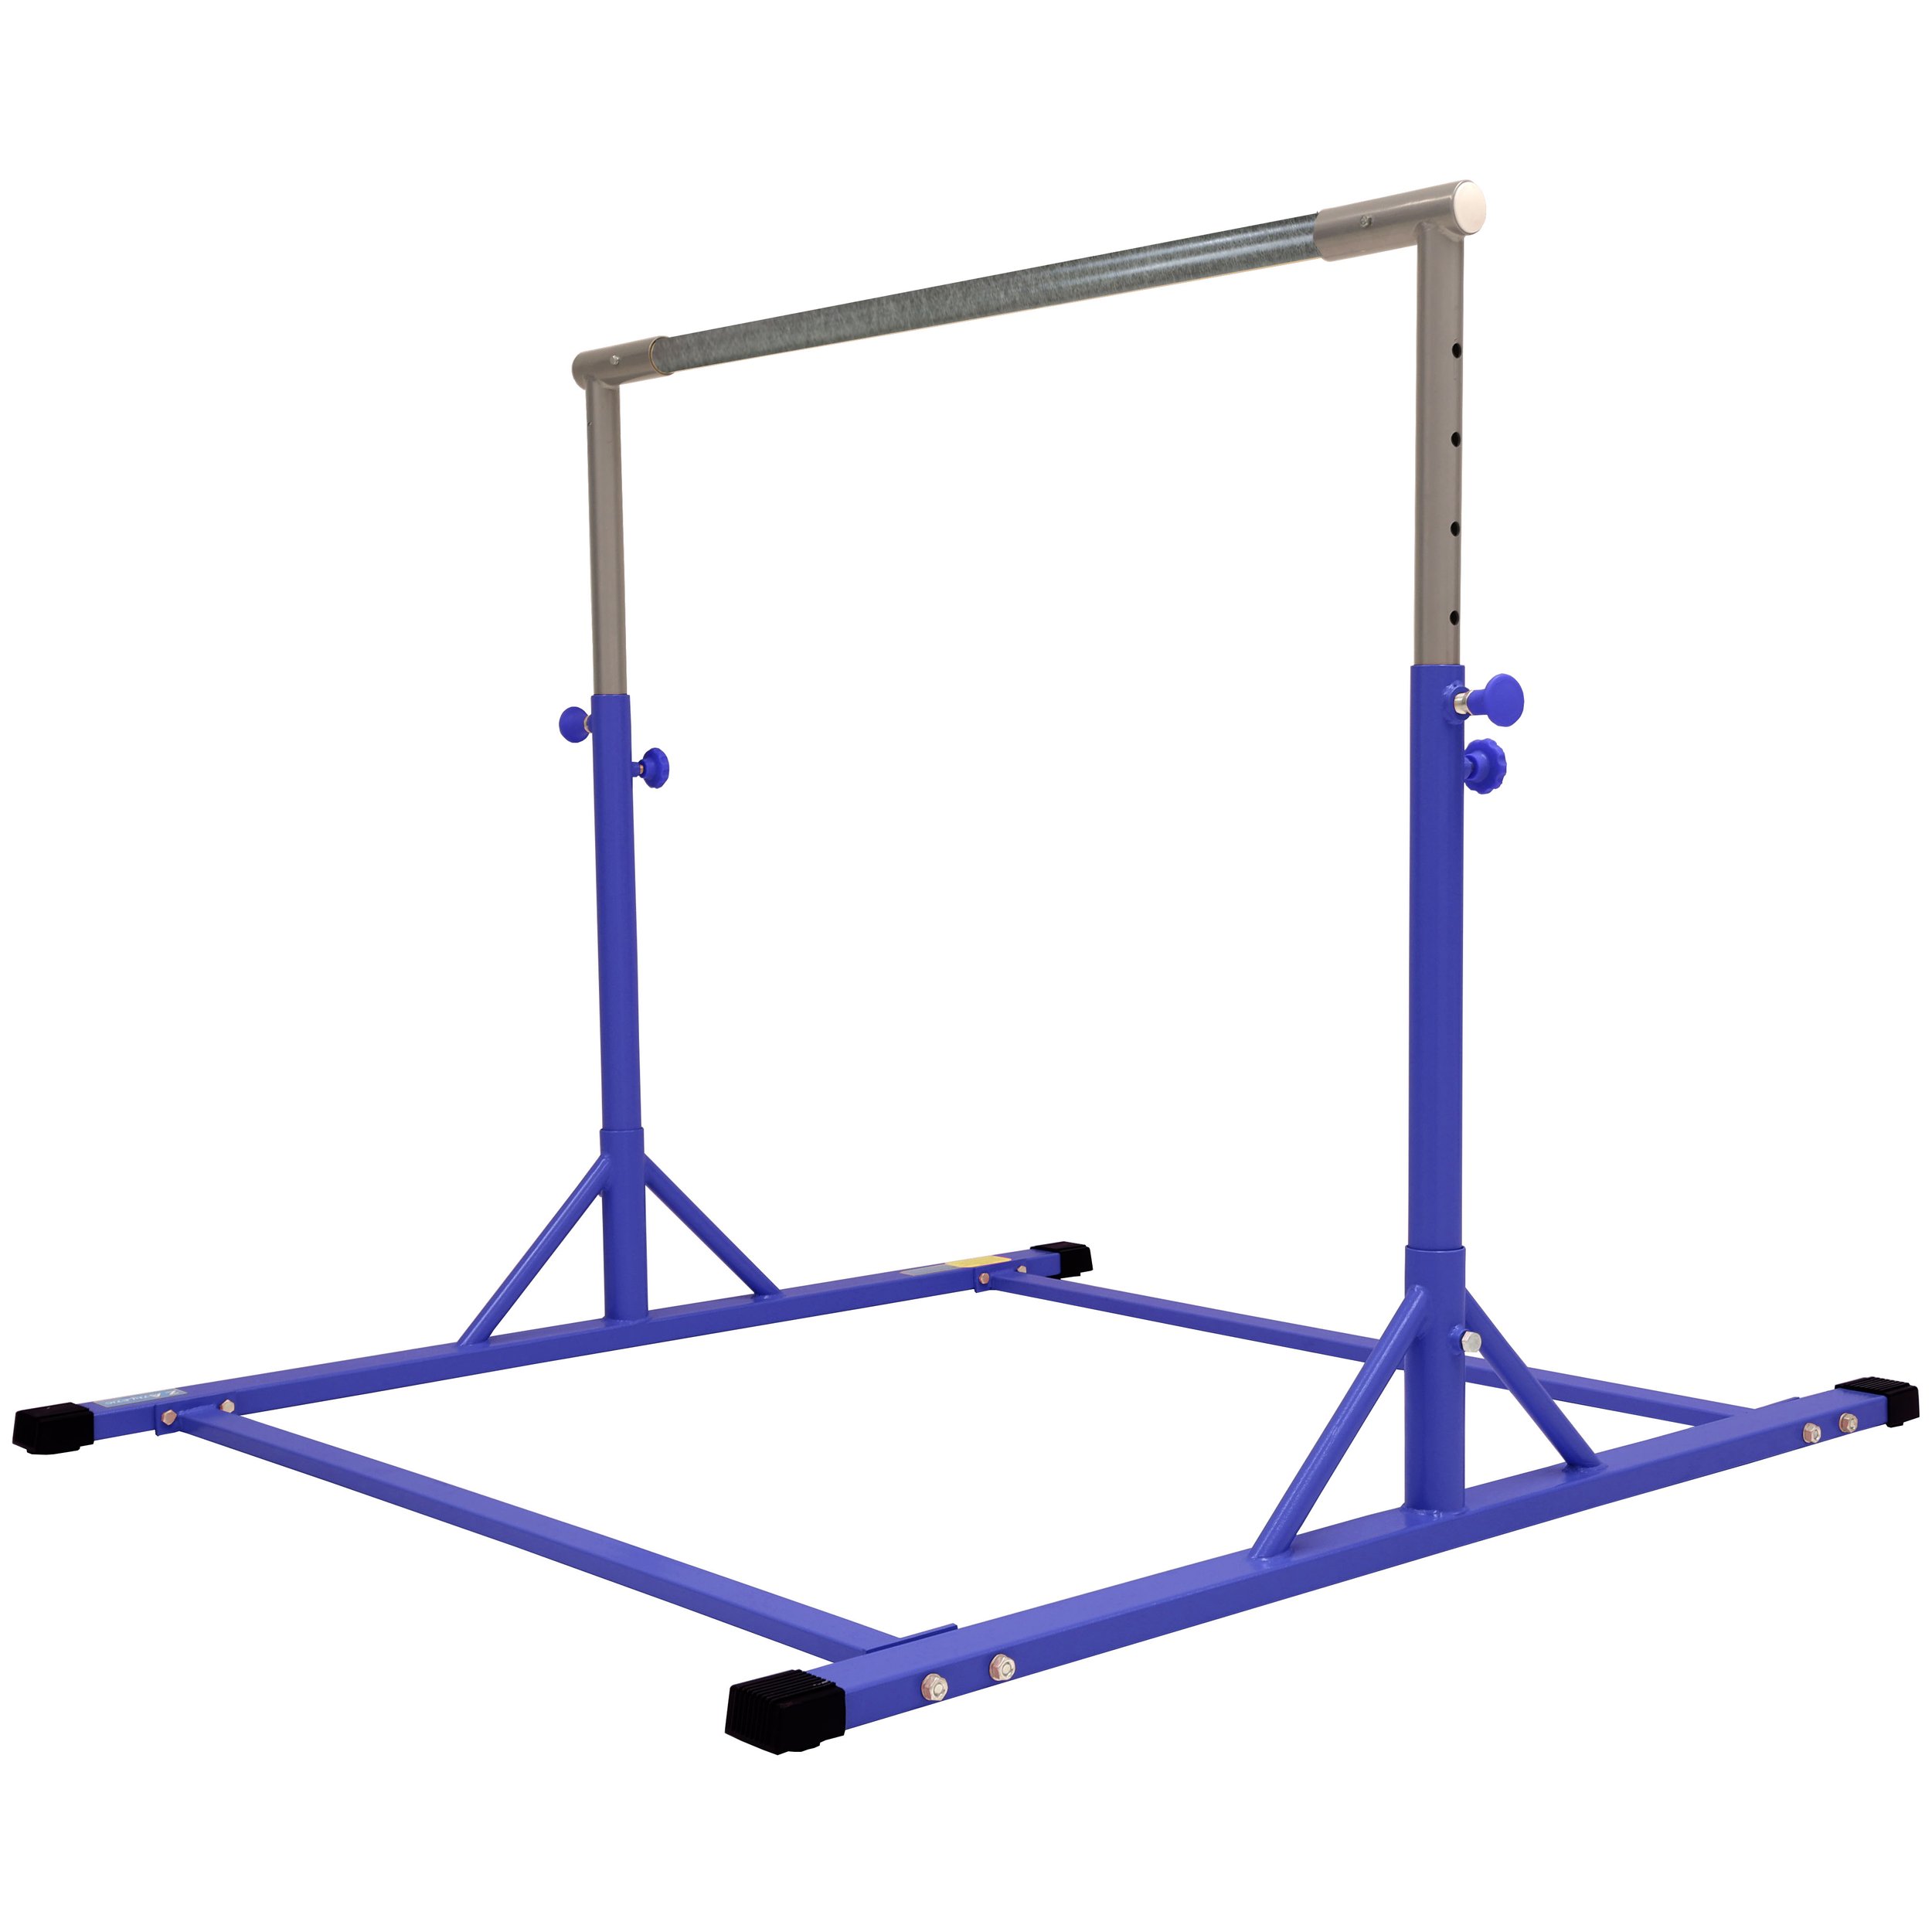 Z Athletic Elite Gymnastics Bar with Adjustable Height for Kips Training Multiple Colors 